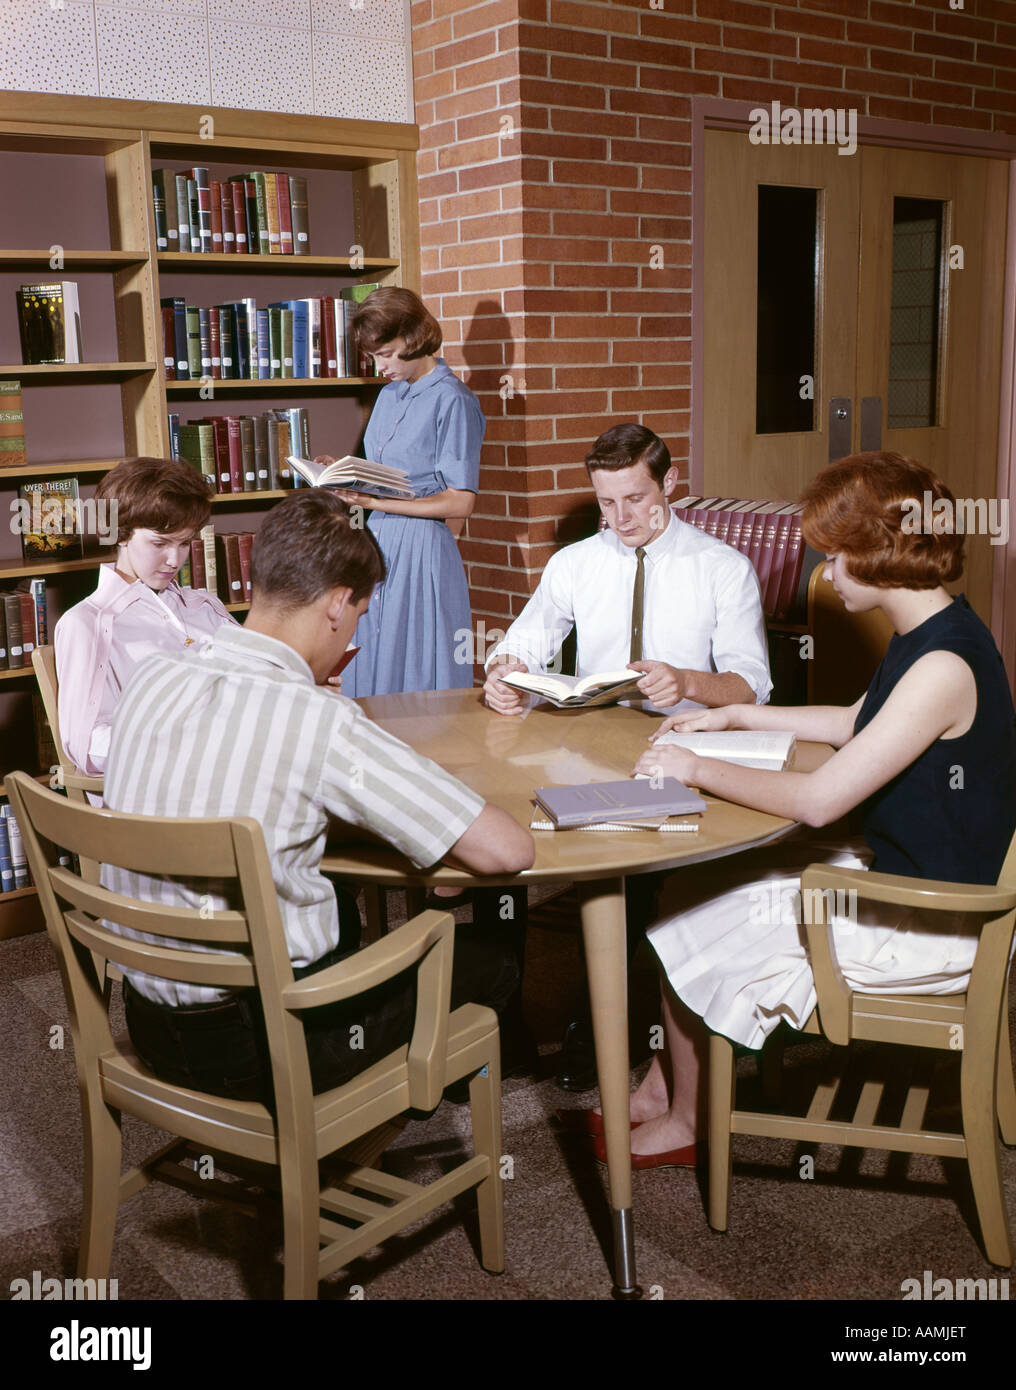 1960s COLLEGE STUDENTS STUDYING IN LIBRARY NOSTALGIA BOY GIRL MAN WOMAN ADOLESCENT Stock Photo